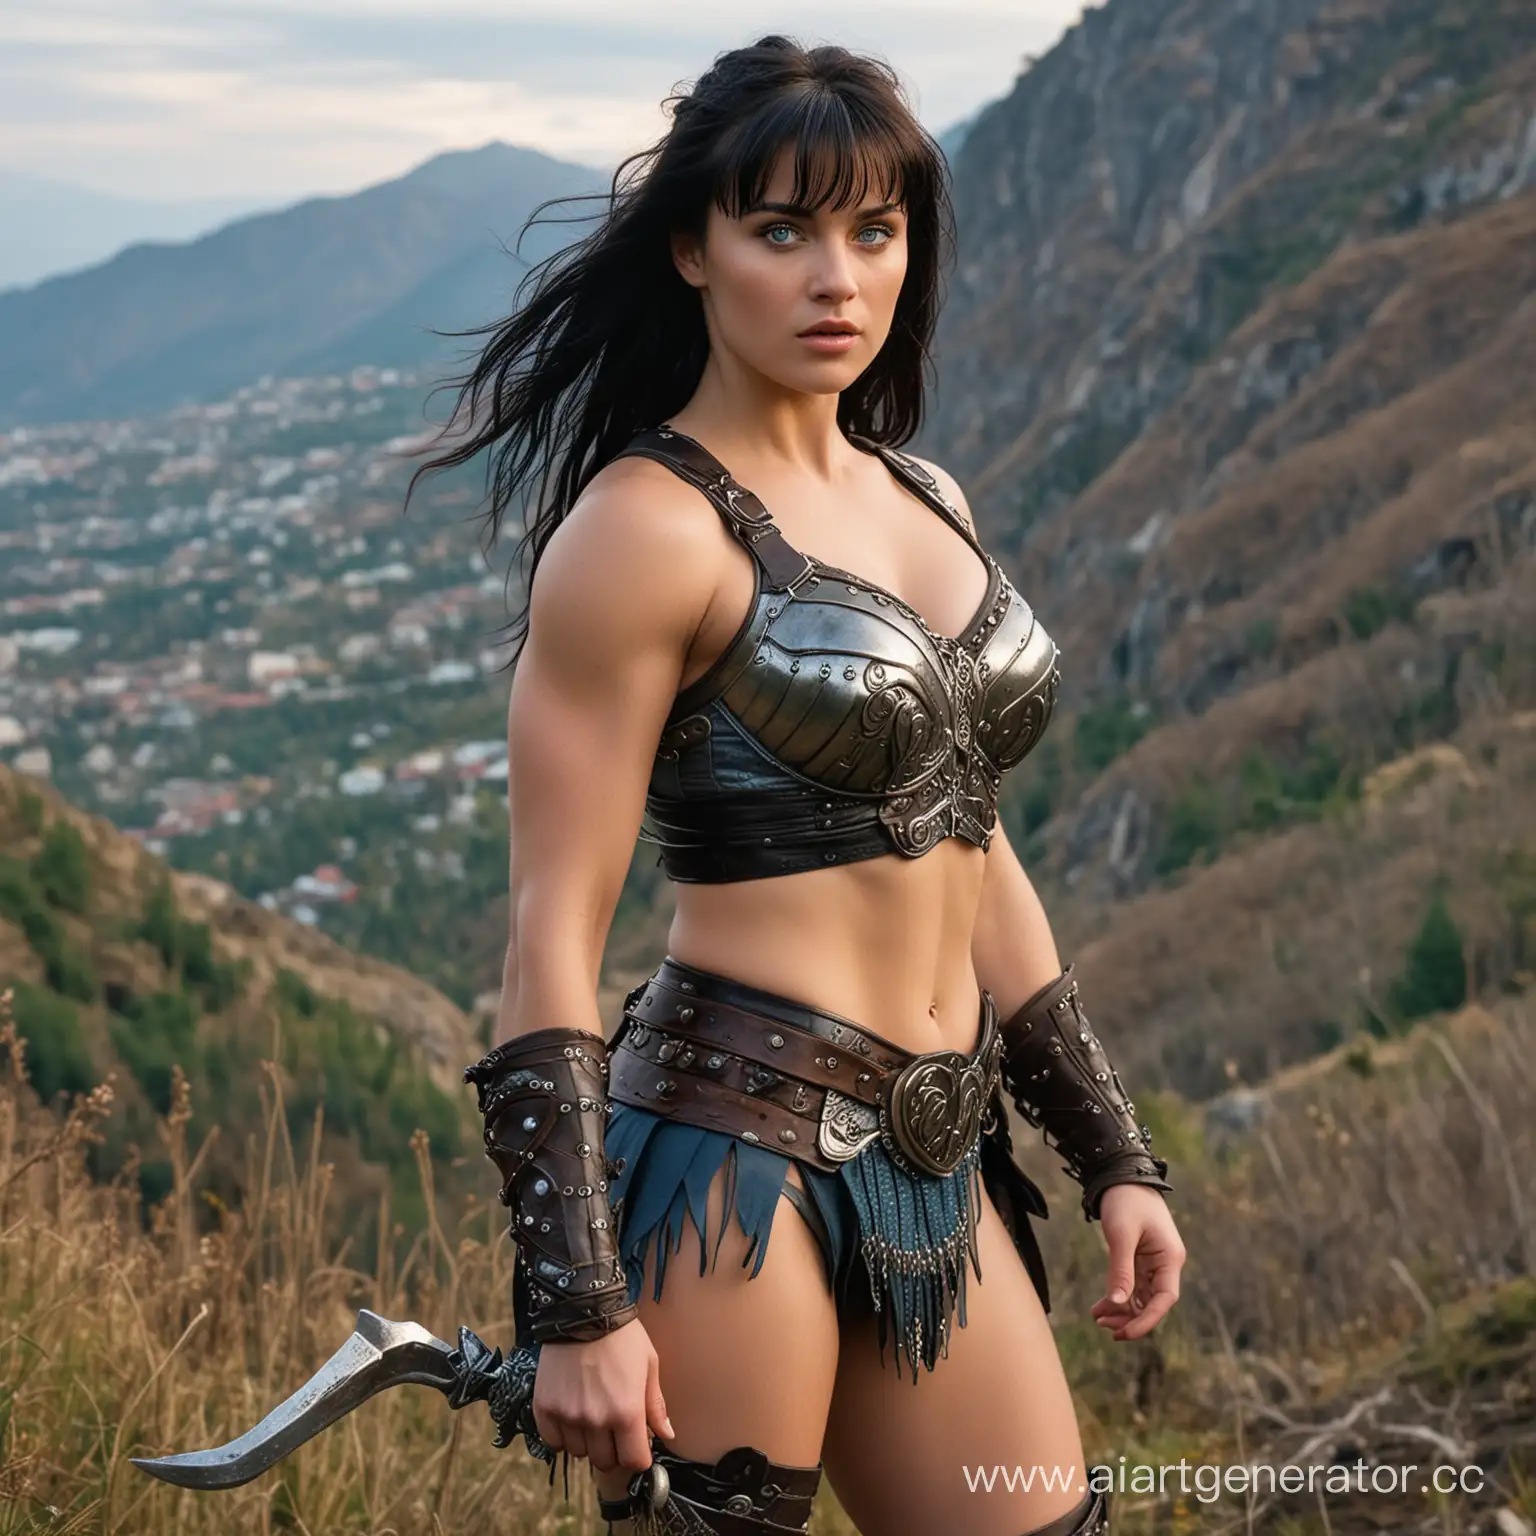 Strong athletic beautiful-faced Xena Warrior Princess, dark hair, blue eyes, voluptuous thighs, laced, in Alupka near Mt. Ai-Petri, spring evening